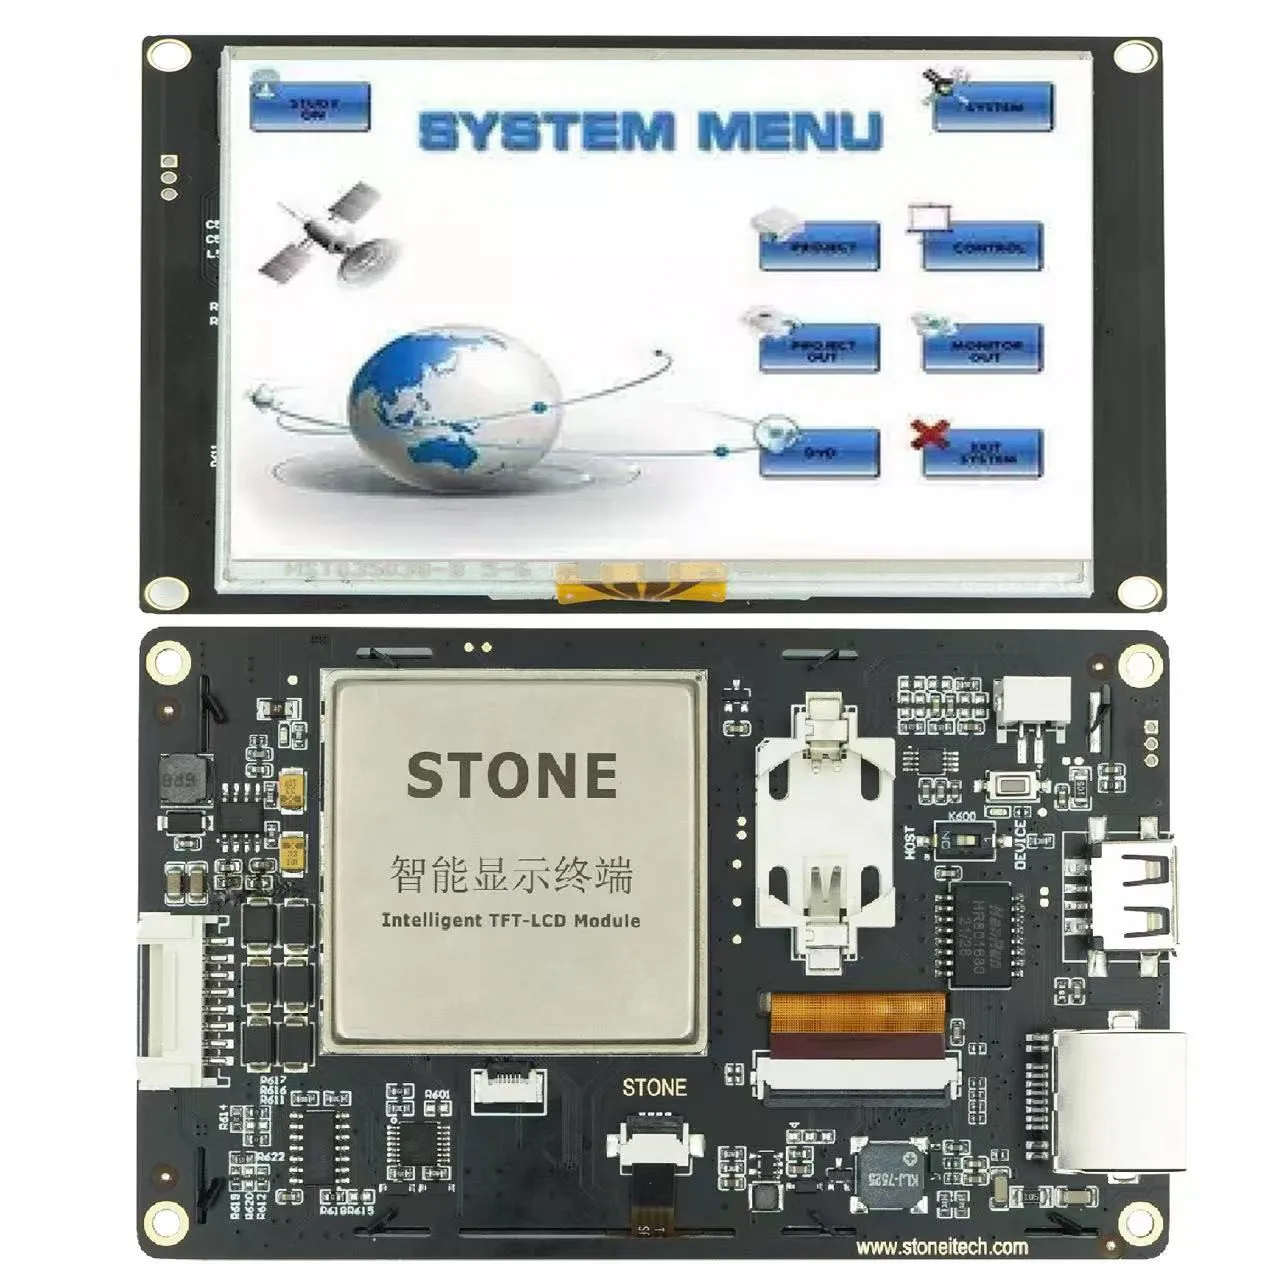 4.3 LCD Touch Module TFT LCD module is a whole display system that comes with no-cost GUI design software(STONE Designer)